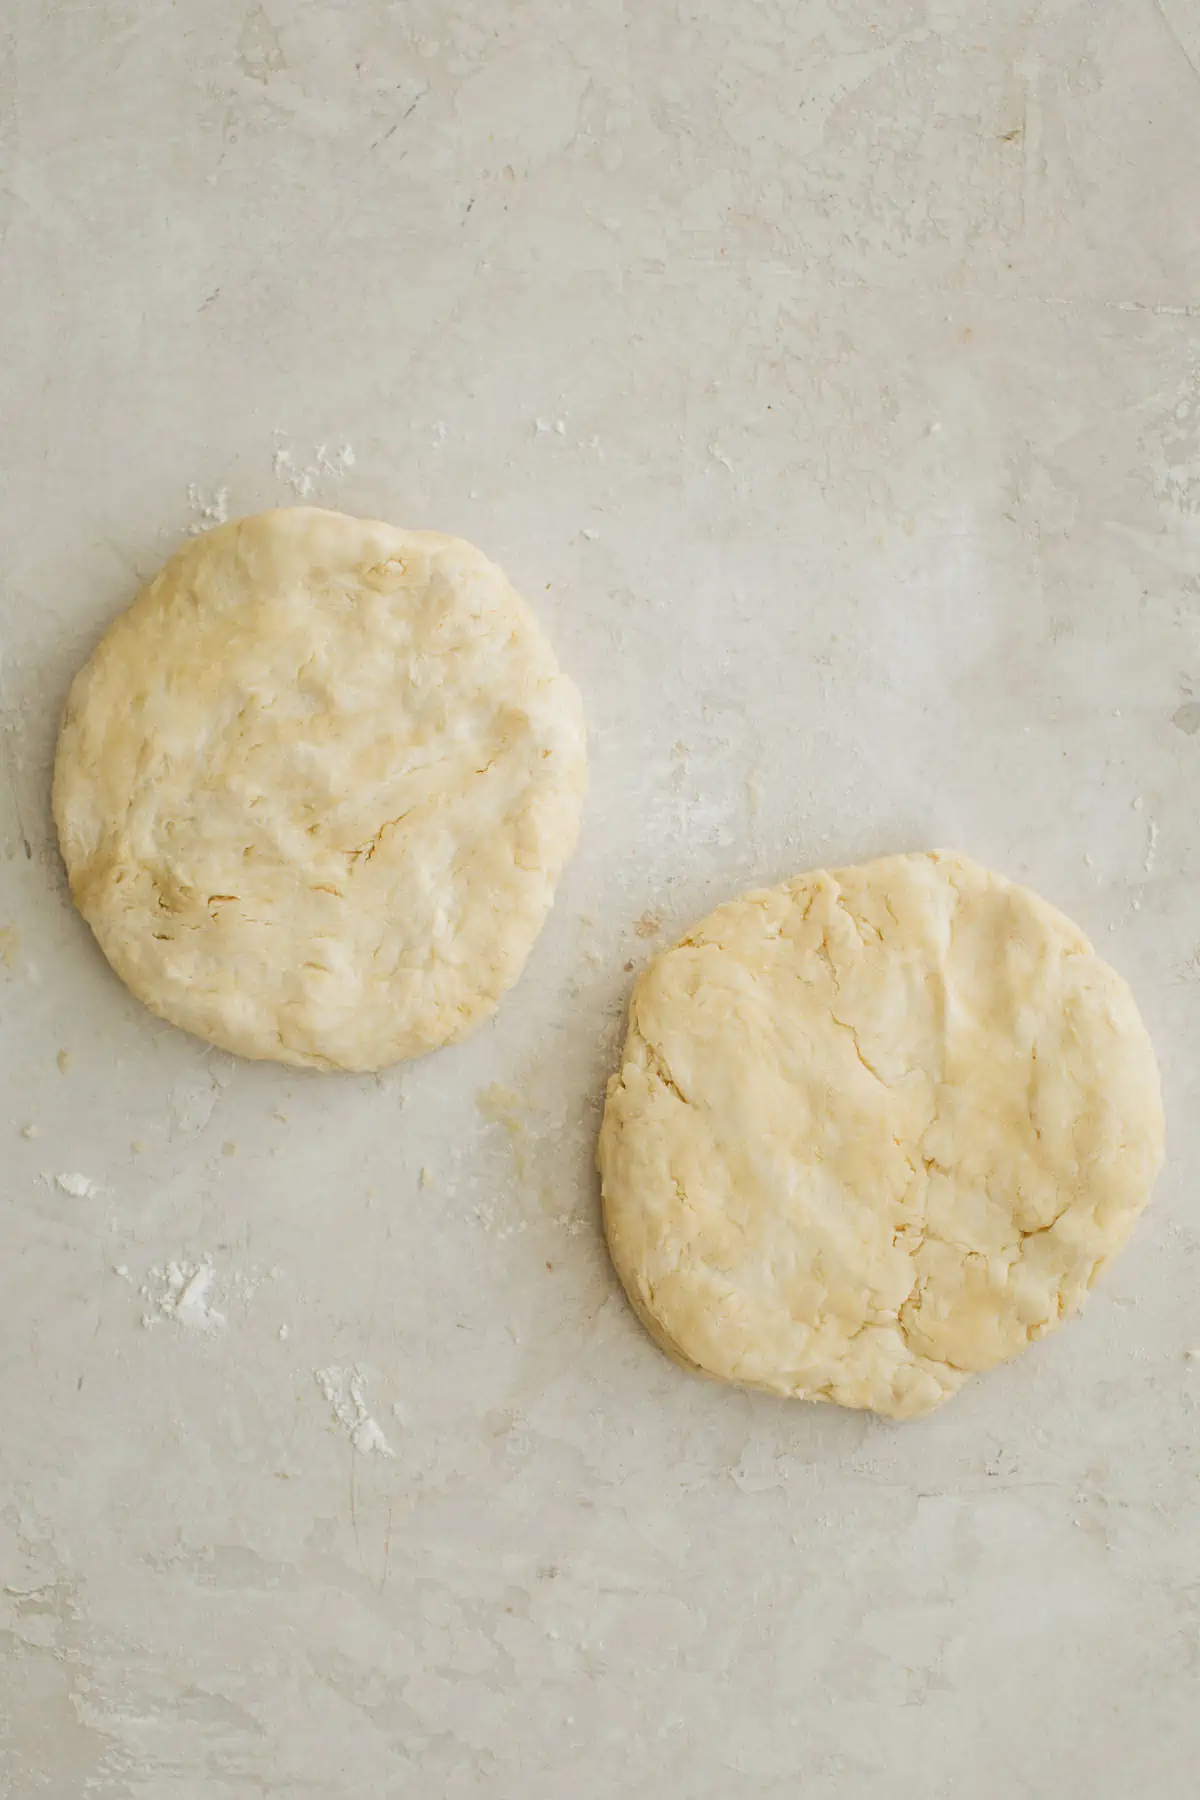 Two pie crusts with shortening and butter shaped into discs.